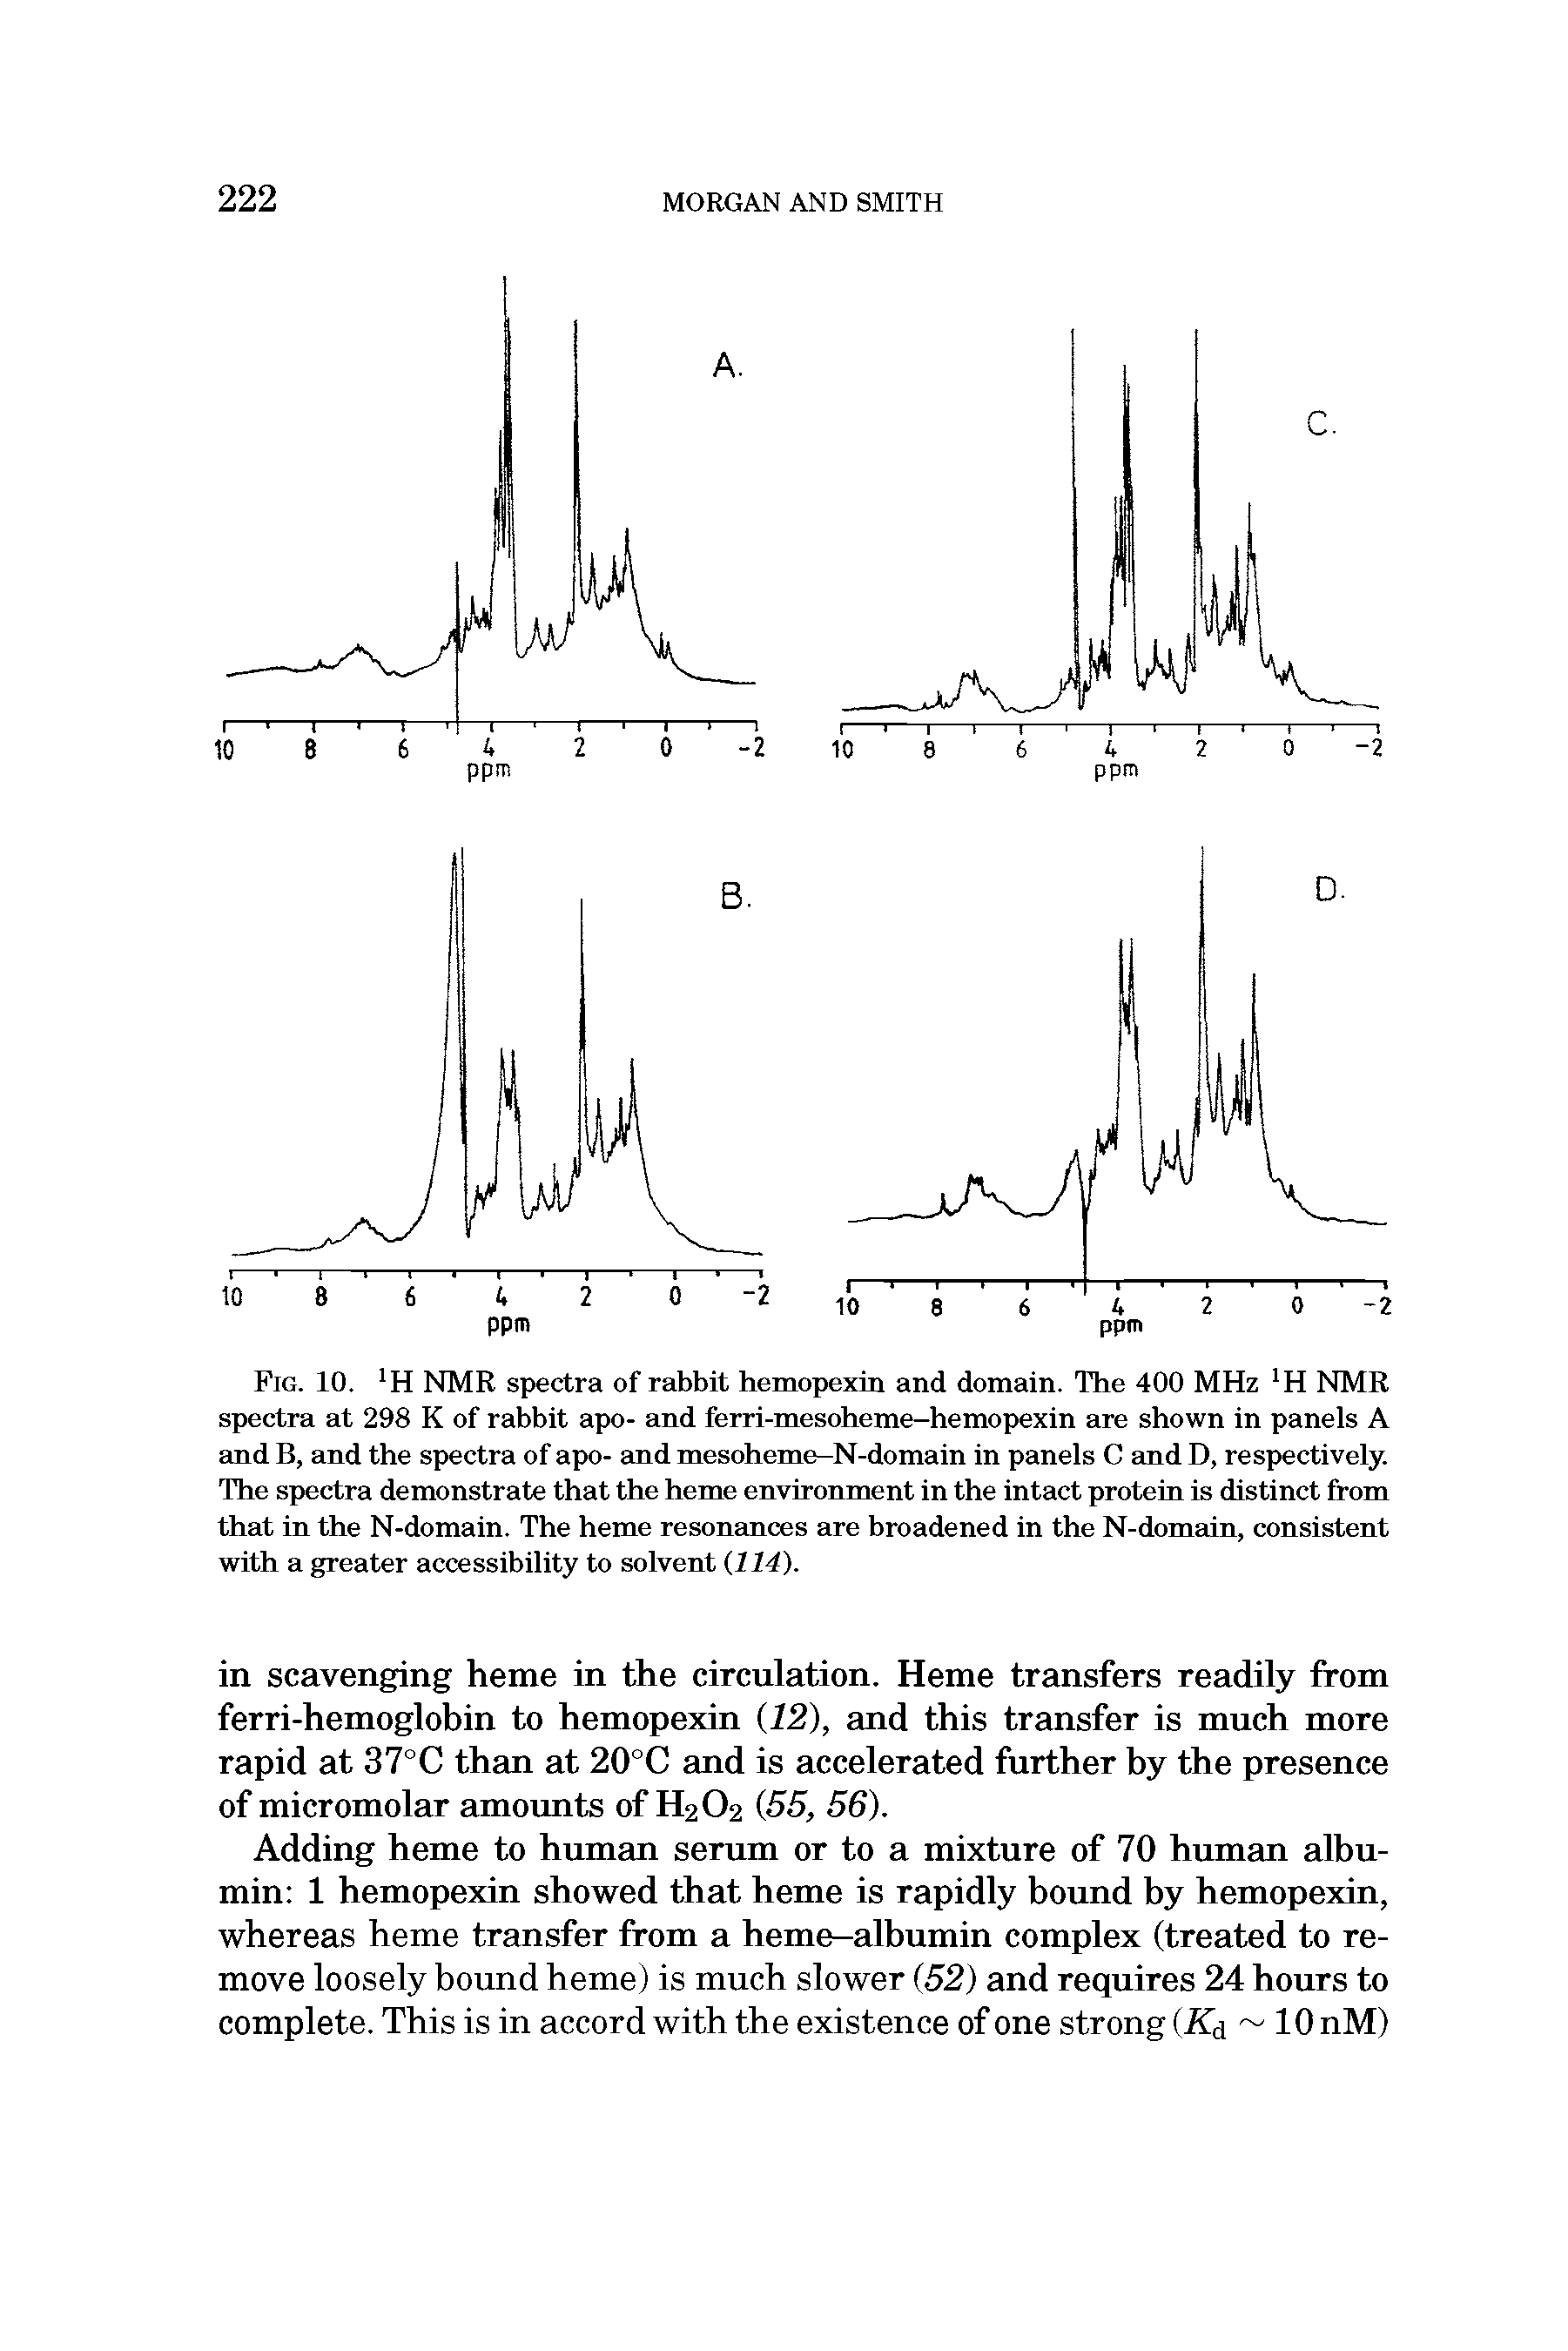 Fig. 10. H NMR spectra of rabbit hemopexin and domain. The 400 MHz H NMR spectra at 298 K of rabbit apo- and ferri-mesoheme-hemopexin are shown in panels A and B, and the spectra of apo- and mesoheme-N-domain in panels C and D, respectively. The spectra demonstrate that the heme environment in the intact protein is distinct from that in the N-domain. The heme resonances are broadened in the N-domain, consistent with a greater accessibility to solvent 114).